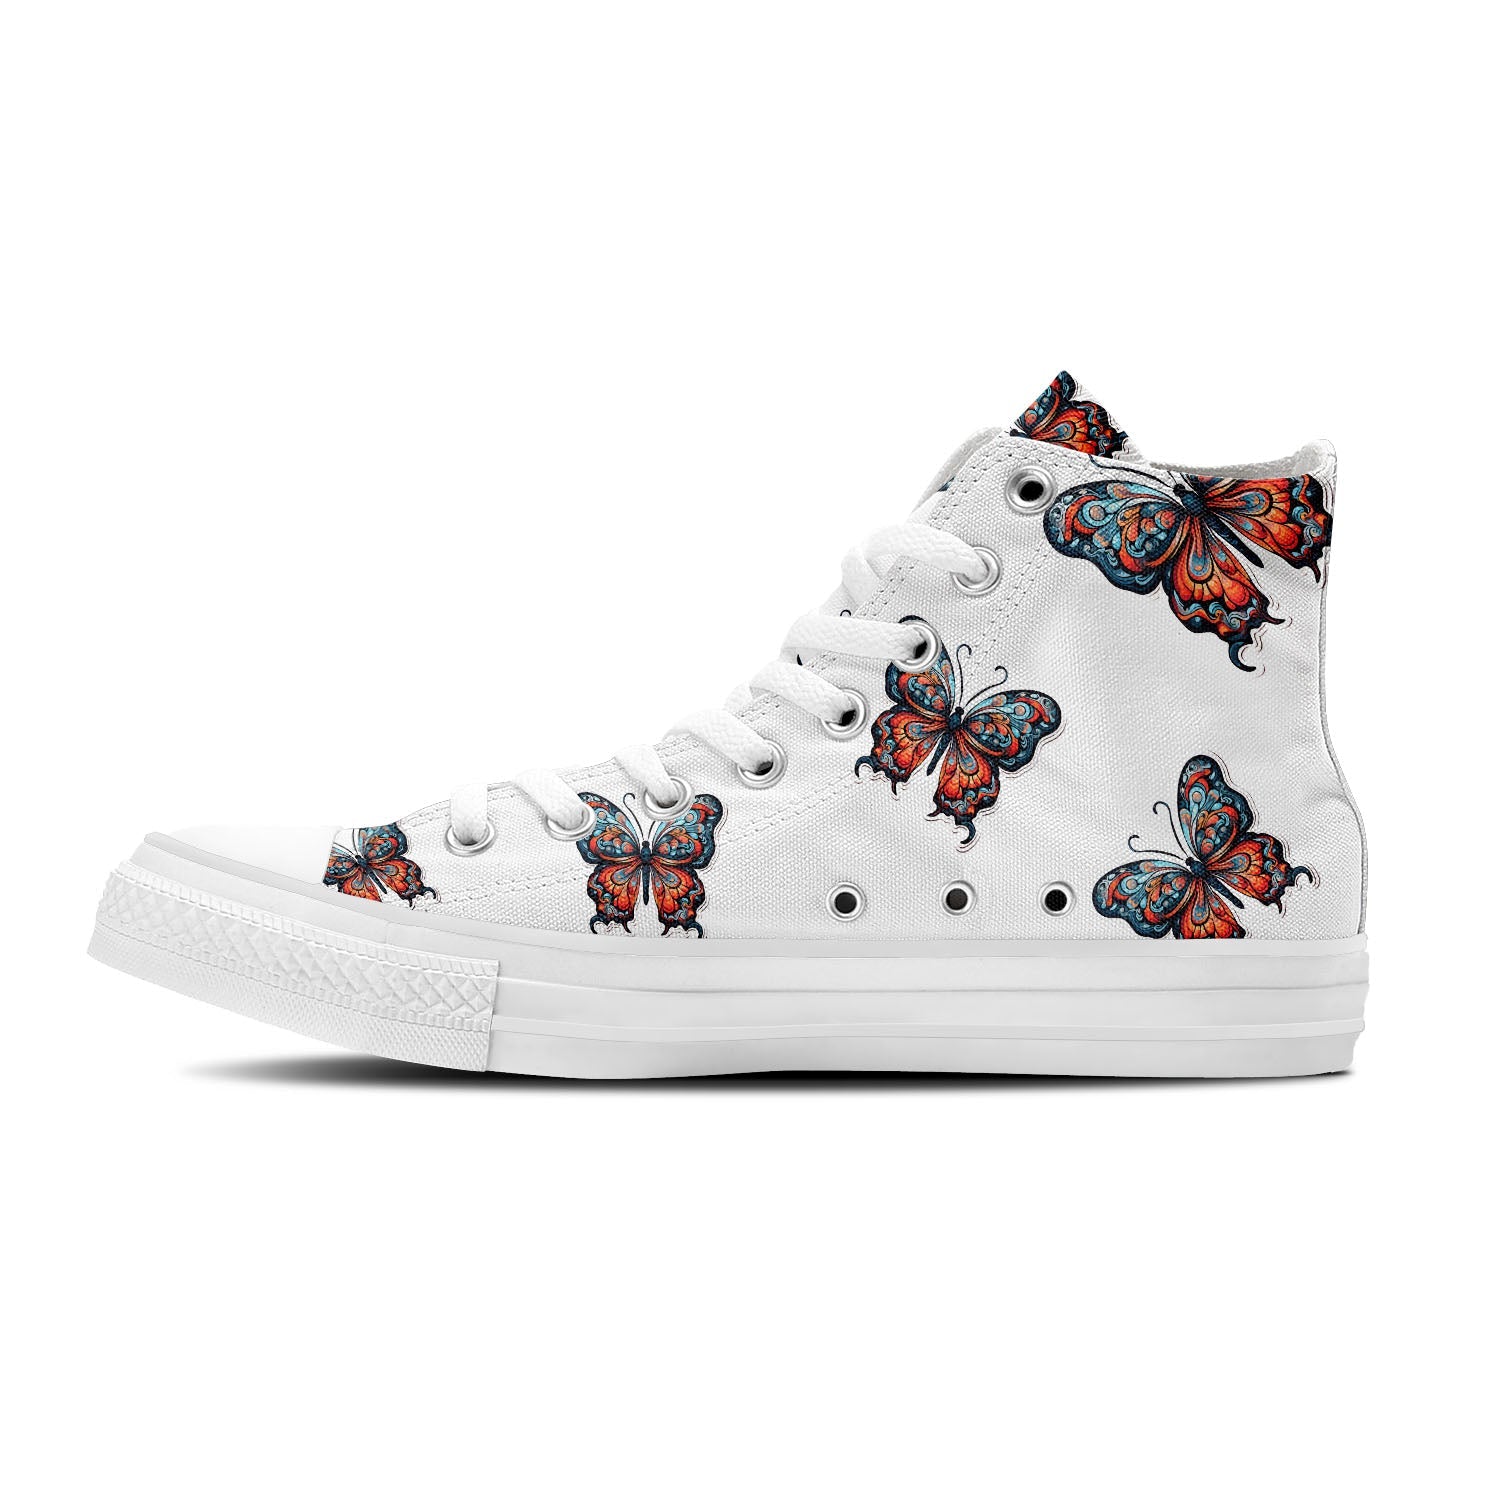 Graceful Soar: Mid-Top Canvas Shoes adorned with Butterfly Elegance for Men and Women – A Whimsical Step into Style and Comfort